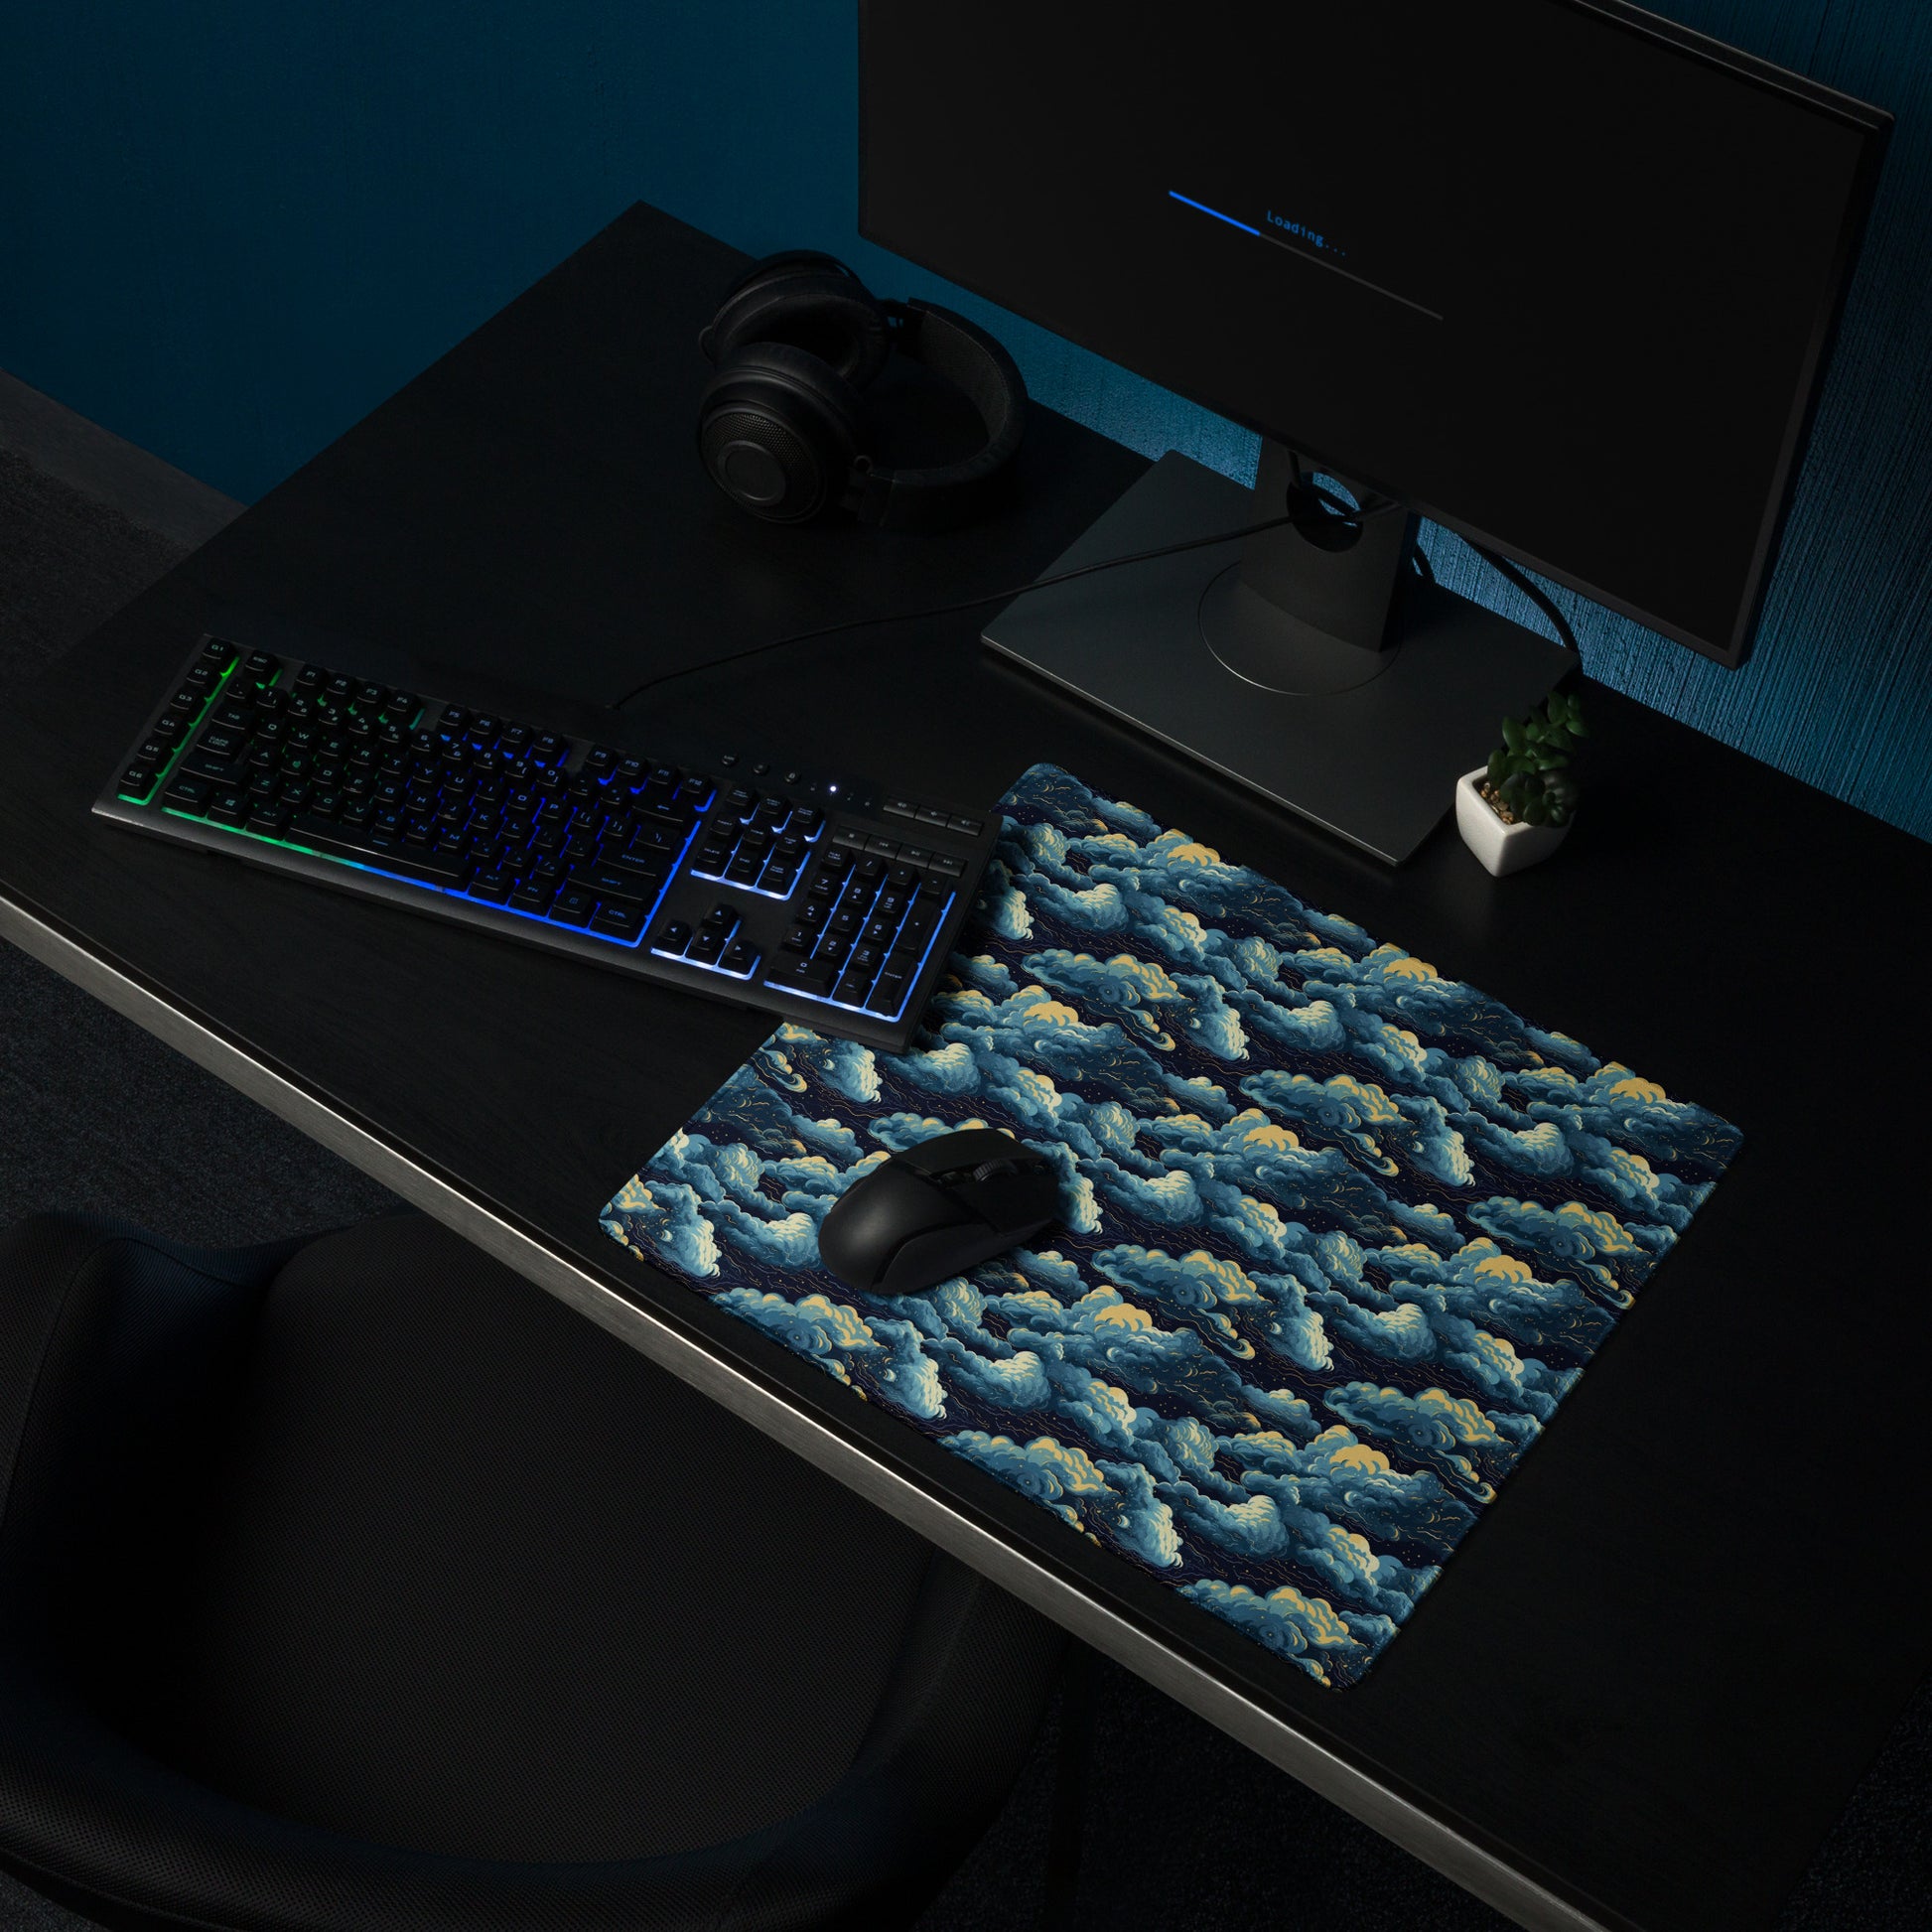 A 18" x 16" desk pad with a cloudy night sky pattern sitting on a desk.